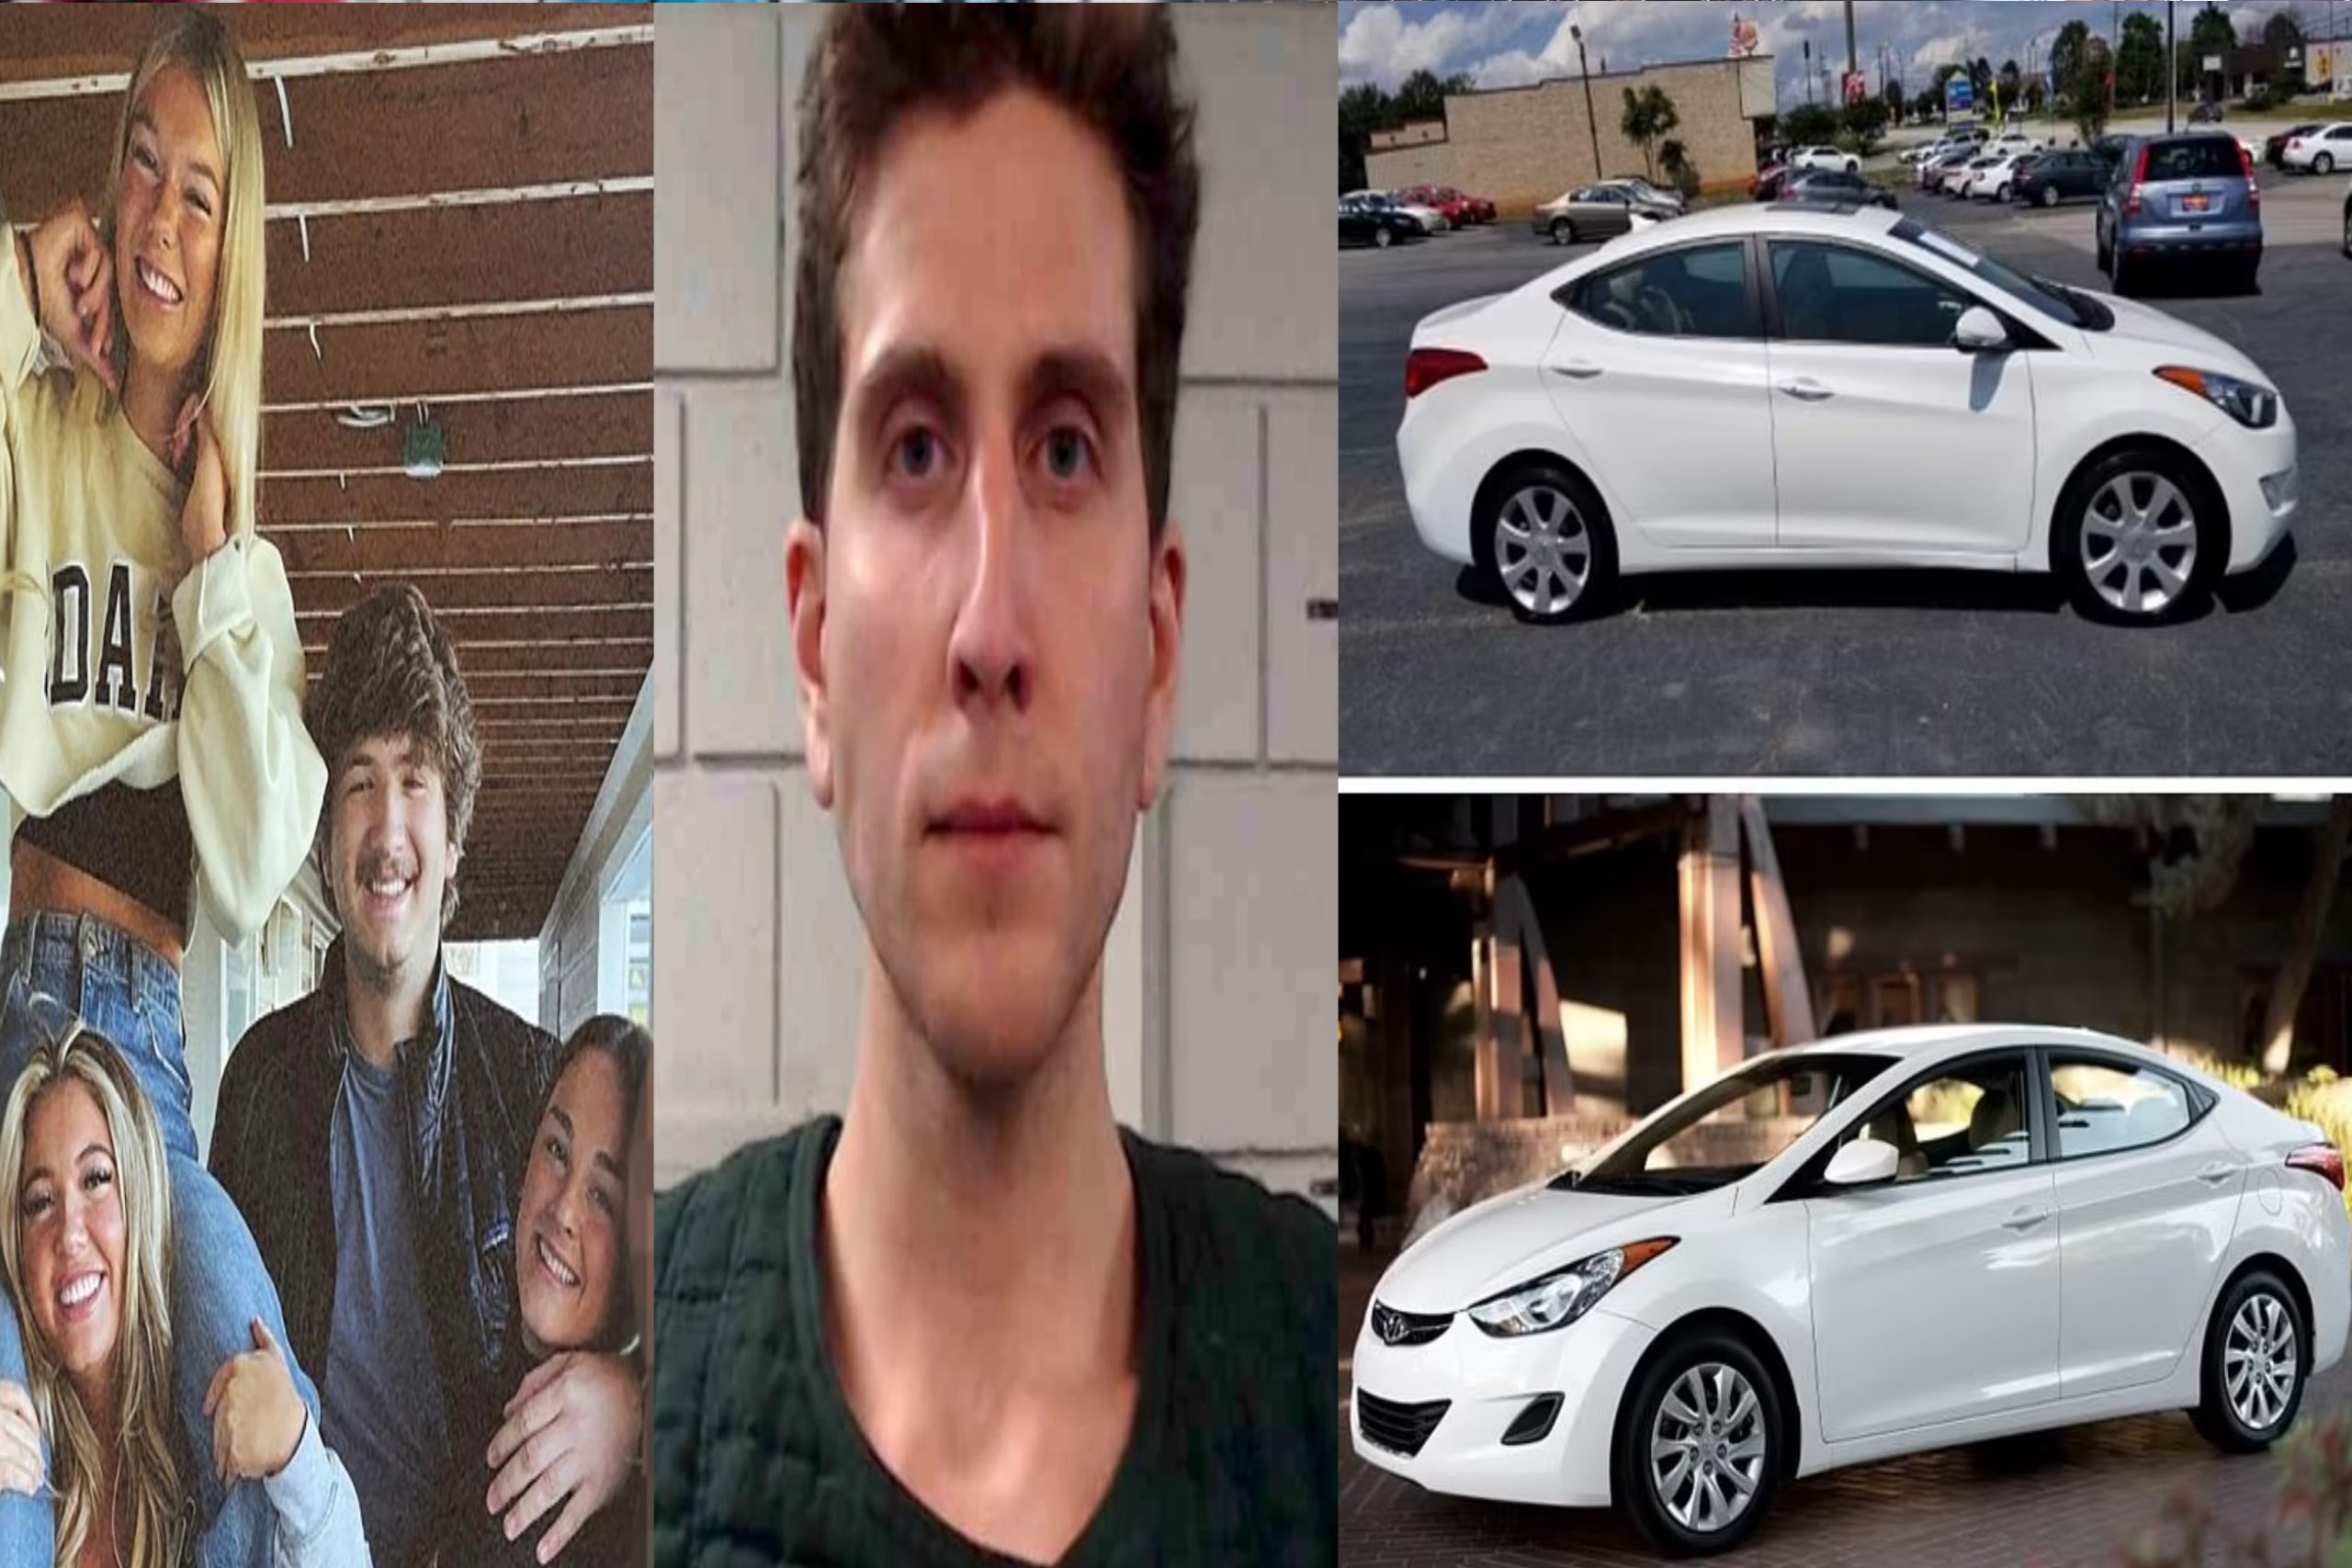 Idaho Students Murder Update: Suspect Kohberger’s Father Accompanied Him on Cross-Country Road Trip in White Hyundai Elantra, Parents Break Silence